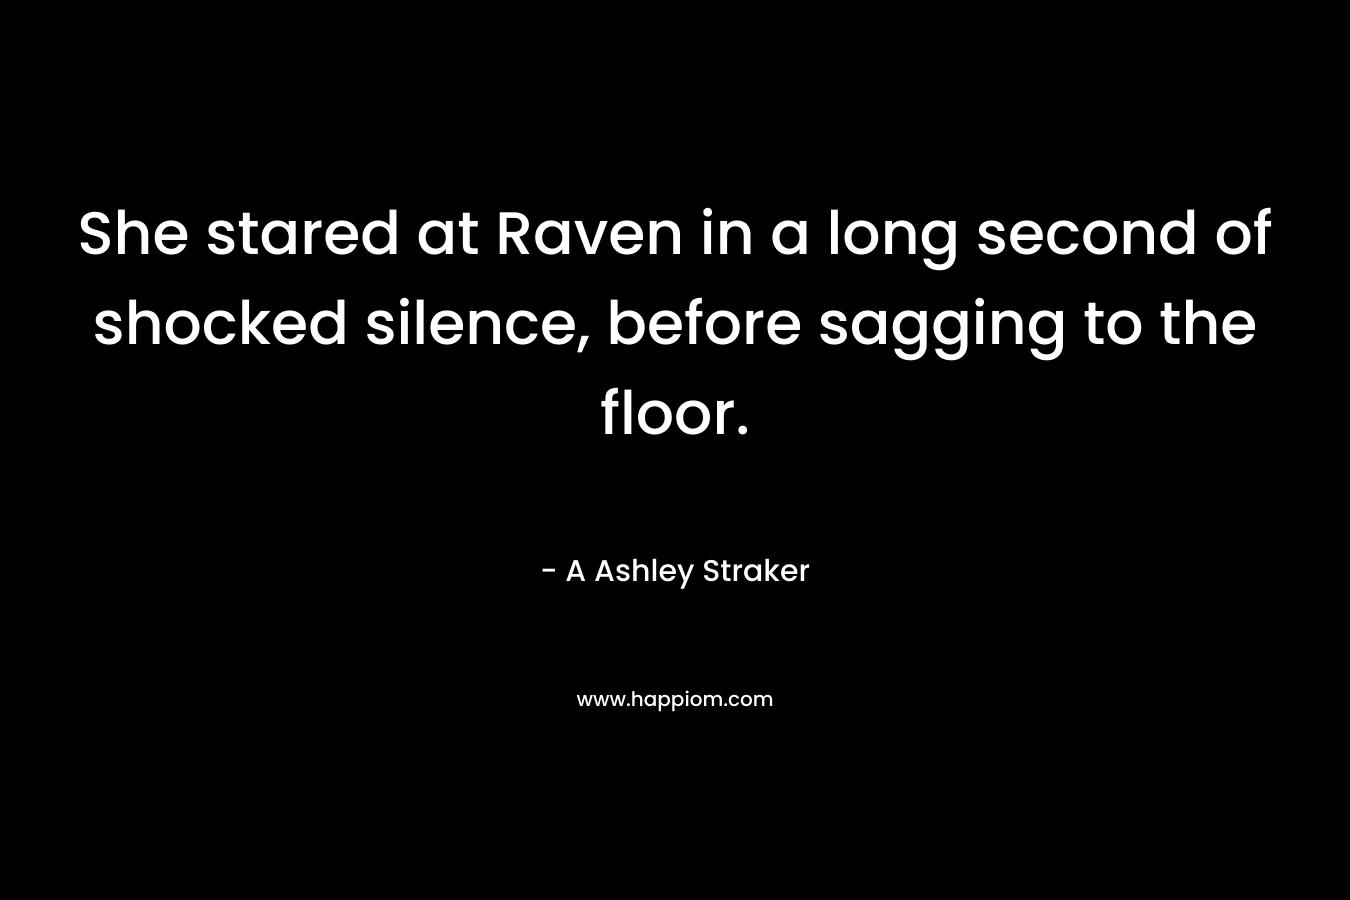 She stared at Raven in a long second of shocked silence, before sagging to the floor. – A Ashley Straker